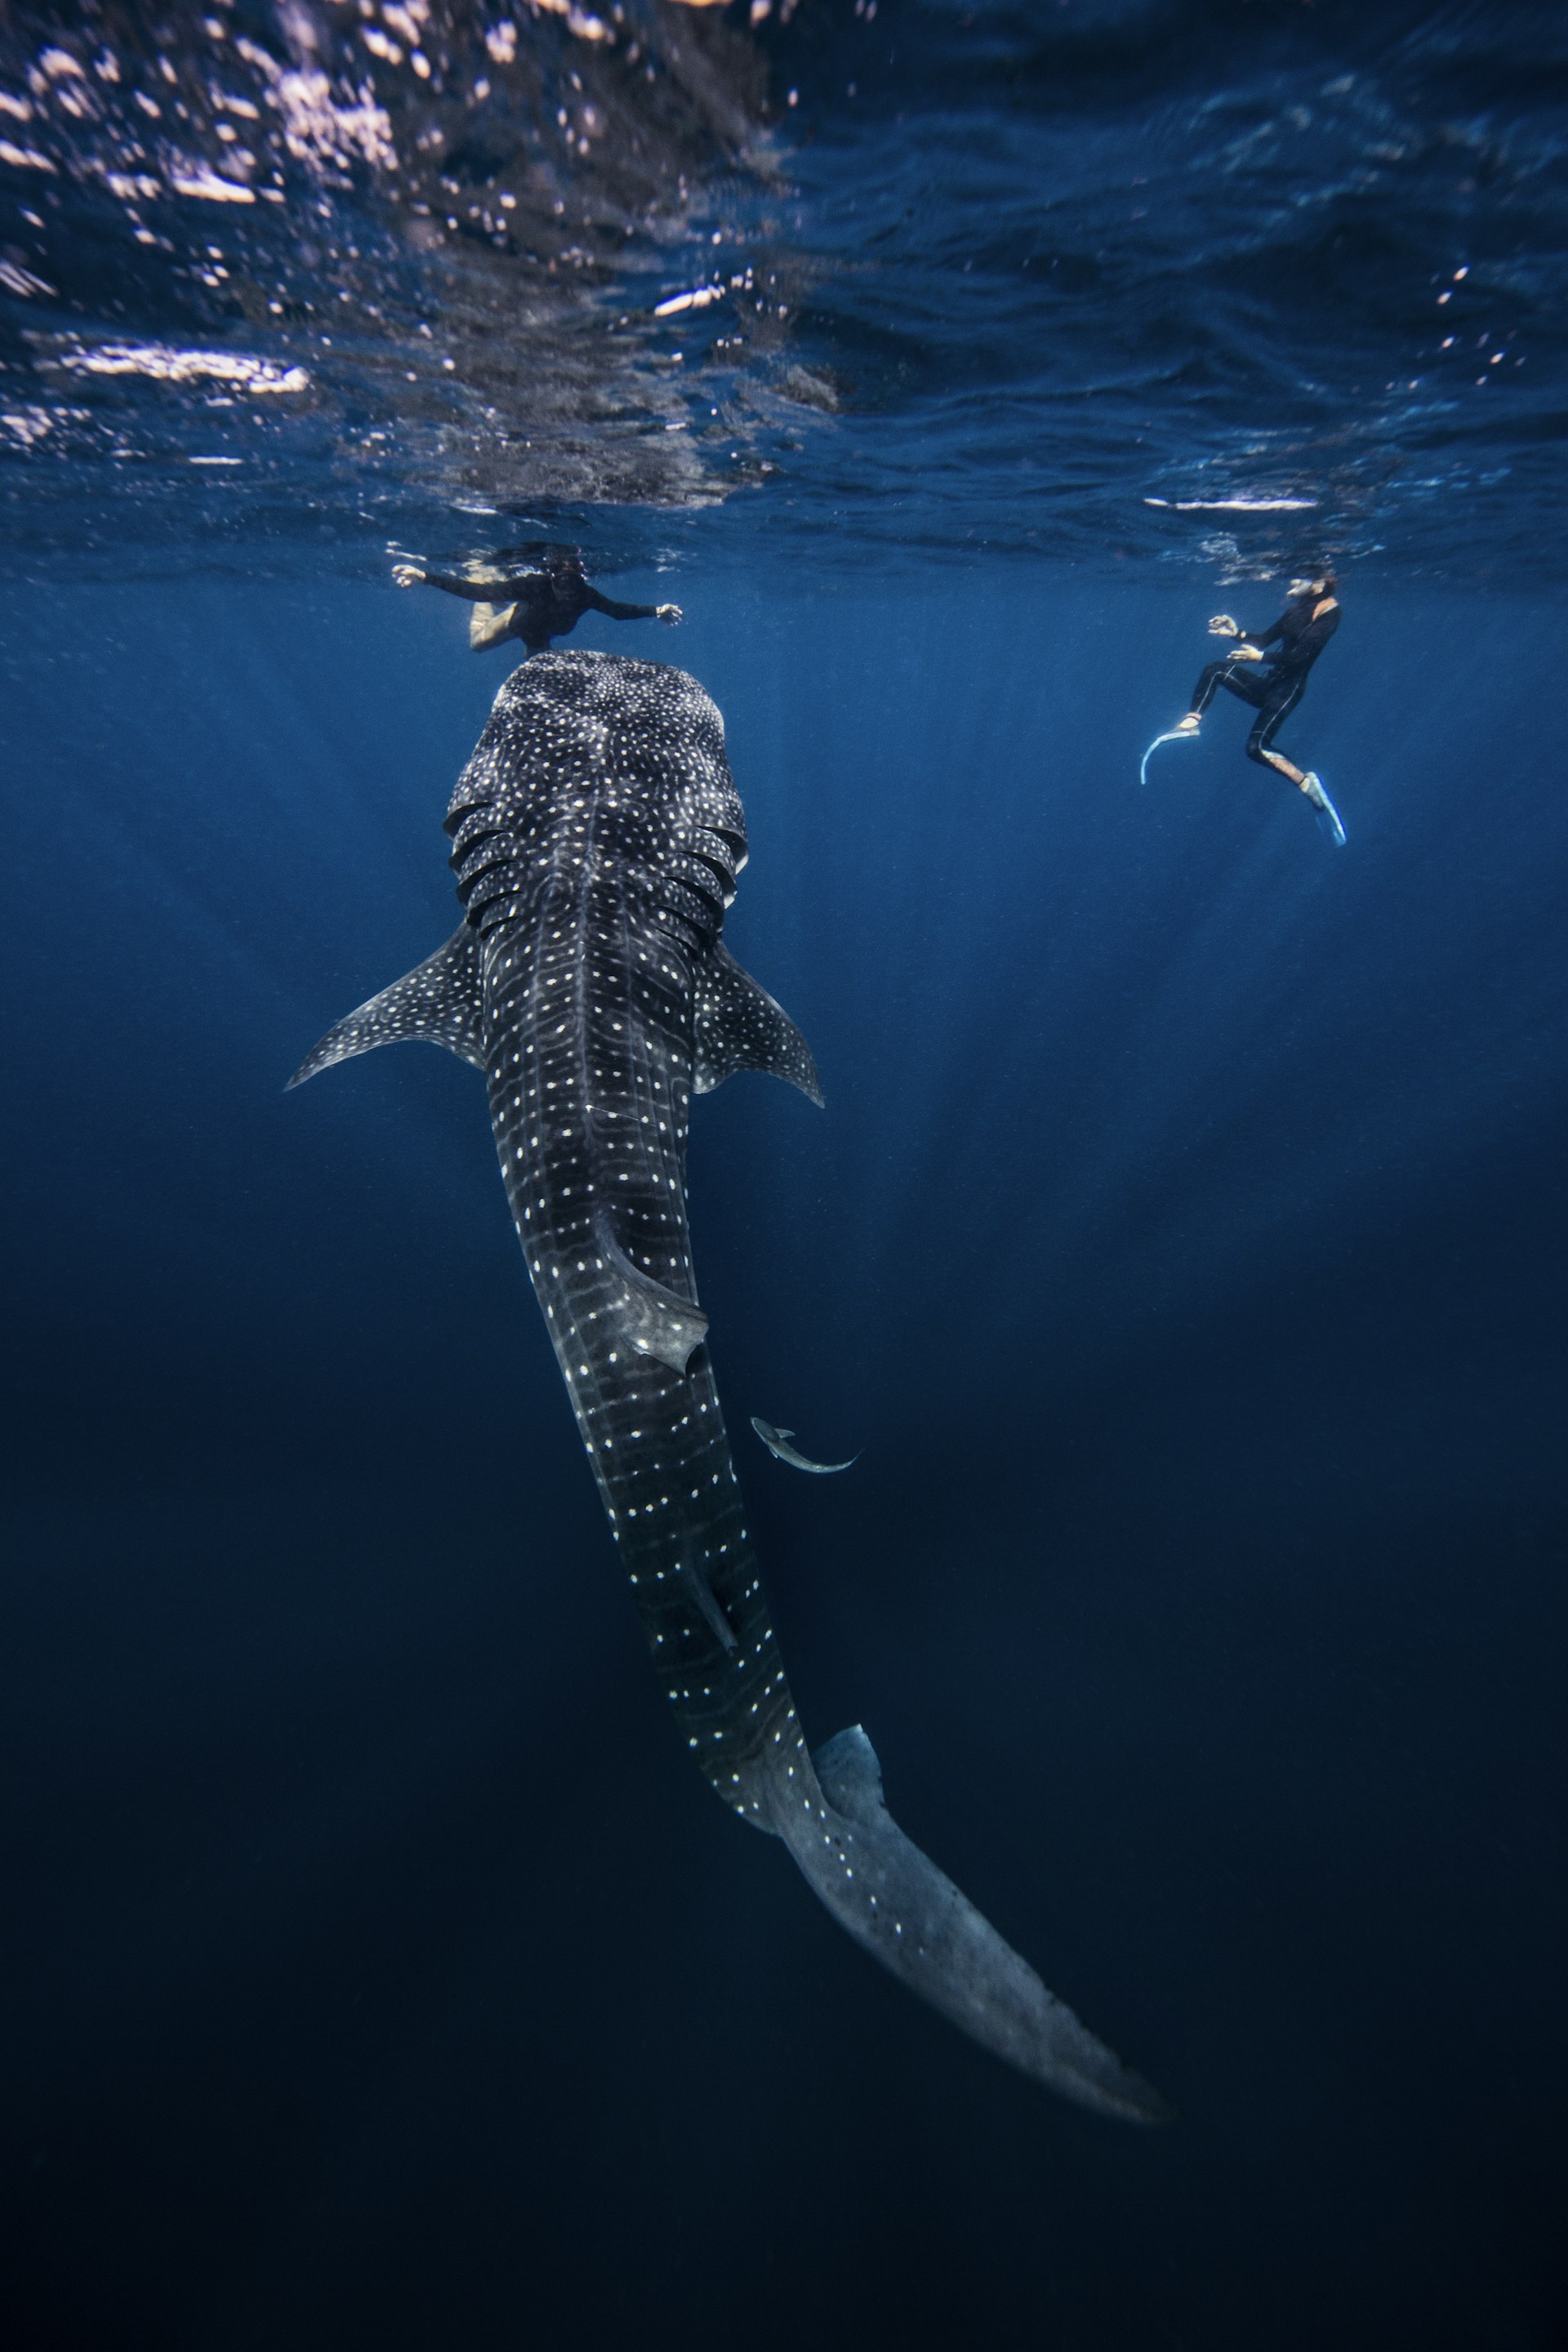 Divers swimming with Whale shark, underwater view, Cancun, Mexico